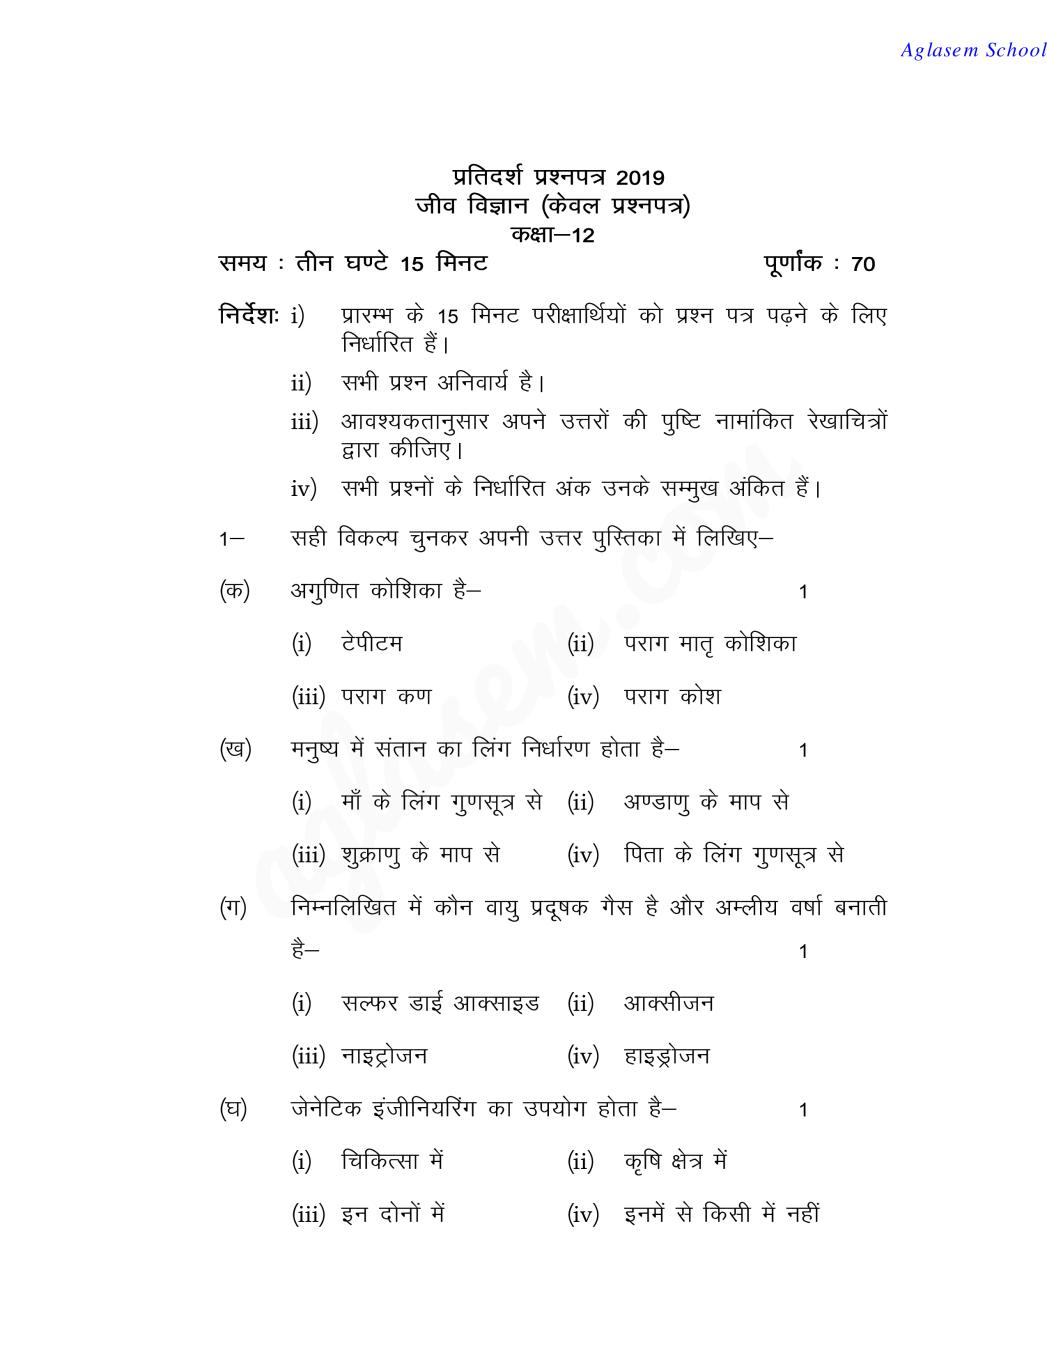 UP Board Class 12 Model Paper 2019 BIOLOGY - Page 1